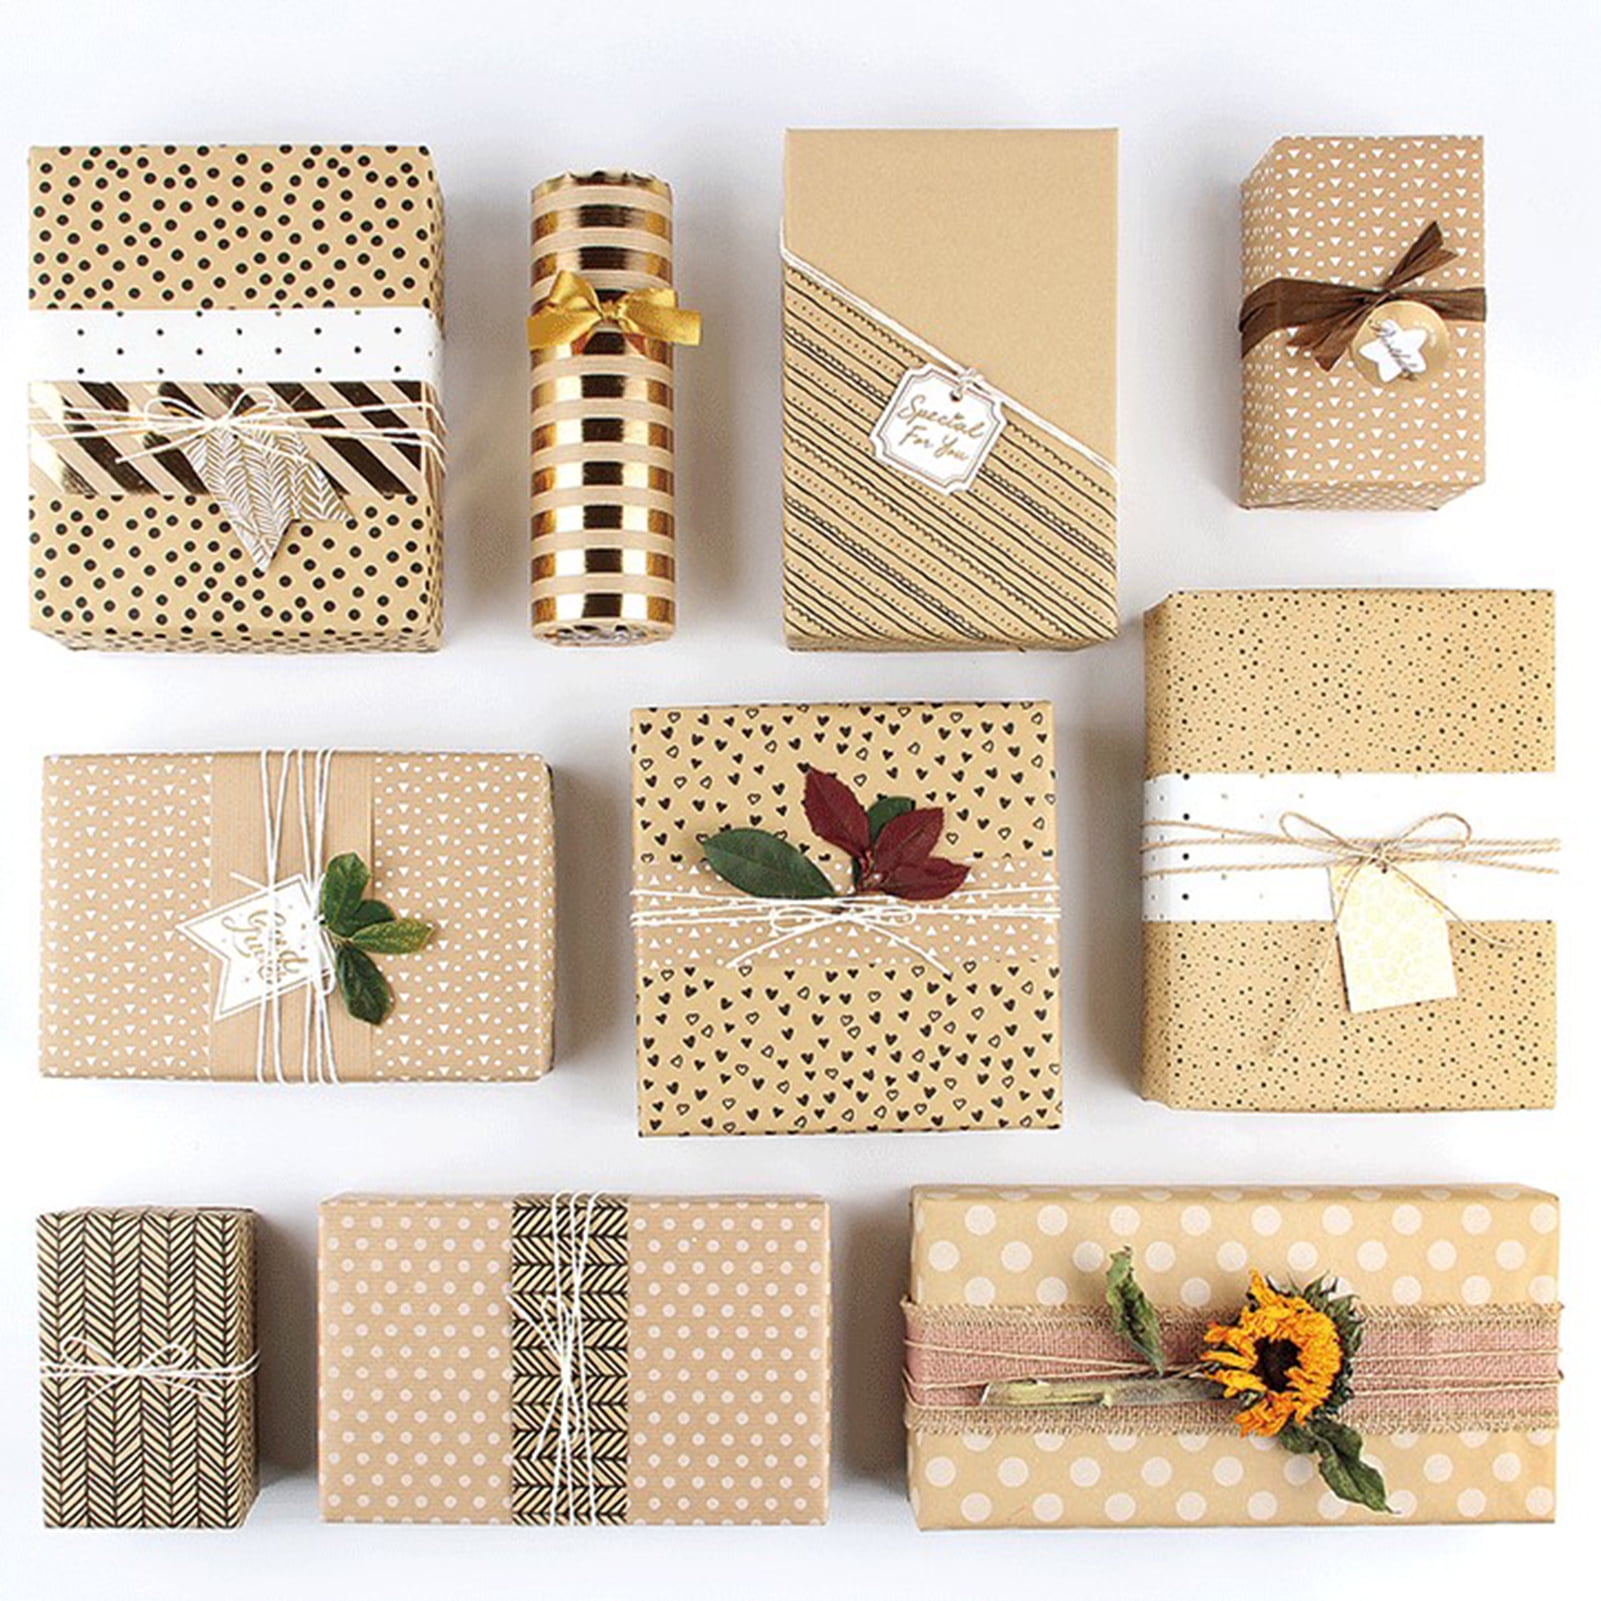 Boerni Birthday Wrapping Paper,28 * 20 inch Kraft Brown Gift Wrapping Paper for Women Men Girl Boy,12 Sheets Dot Stripe Heart Paper with String Sticker Tag